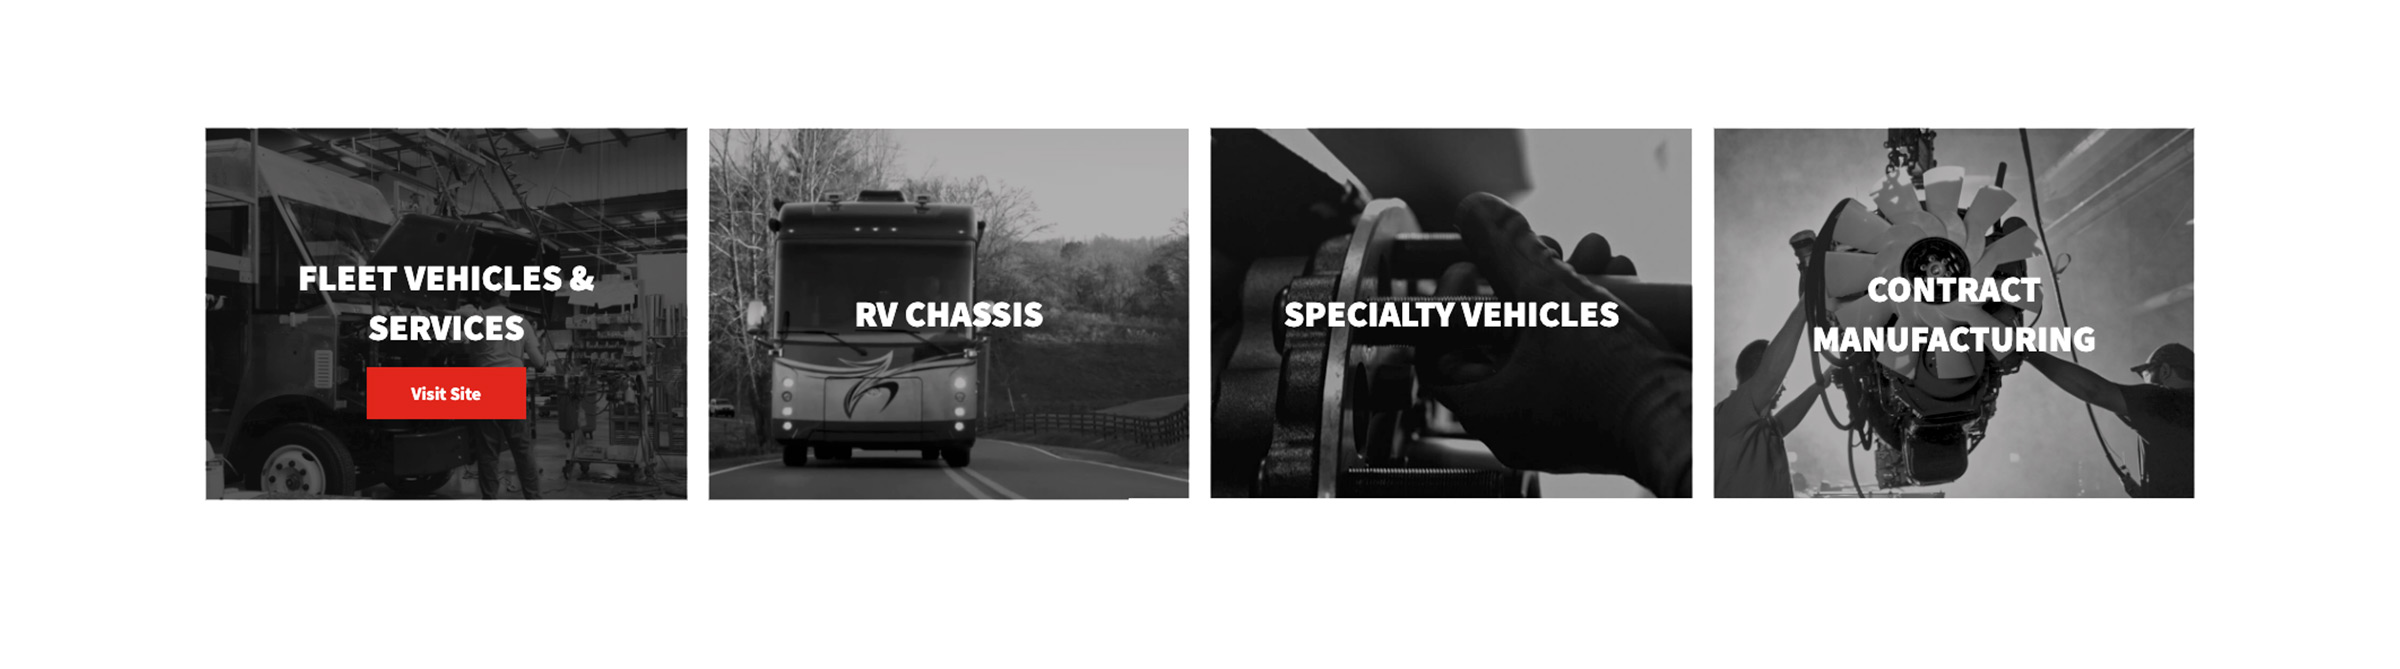 4 squares showing fleet vehicles, RV Chassis, specialty vehicles, and contract manufacturing service options